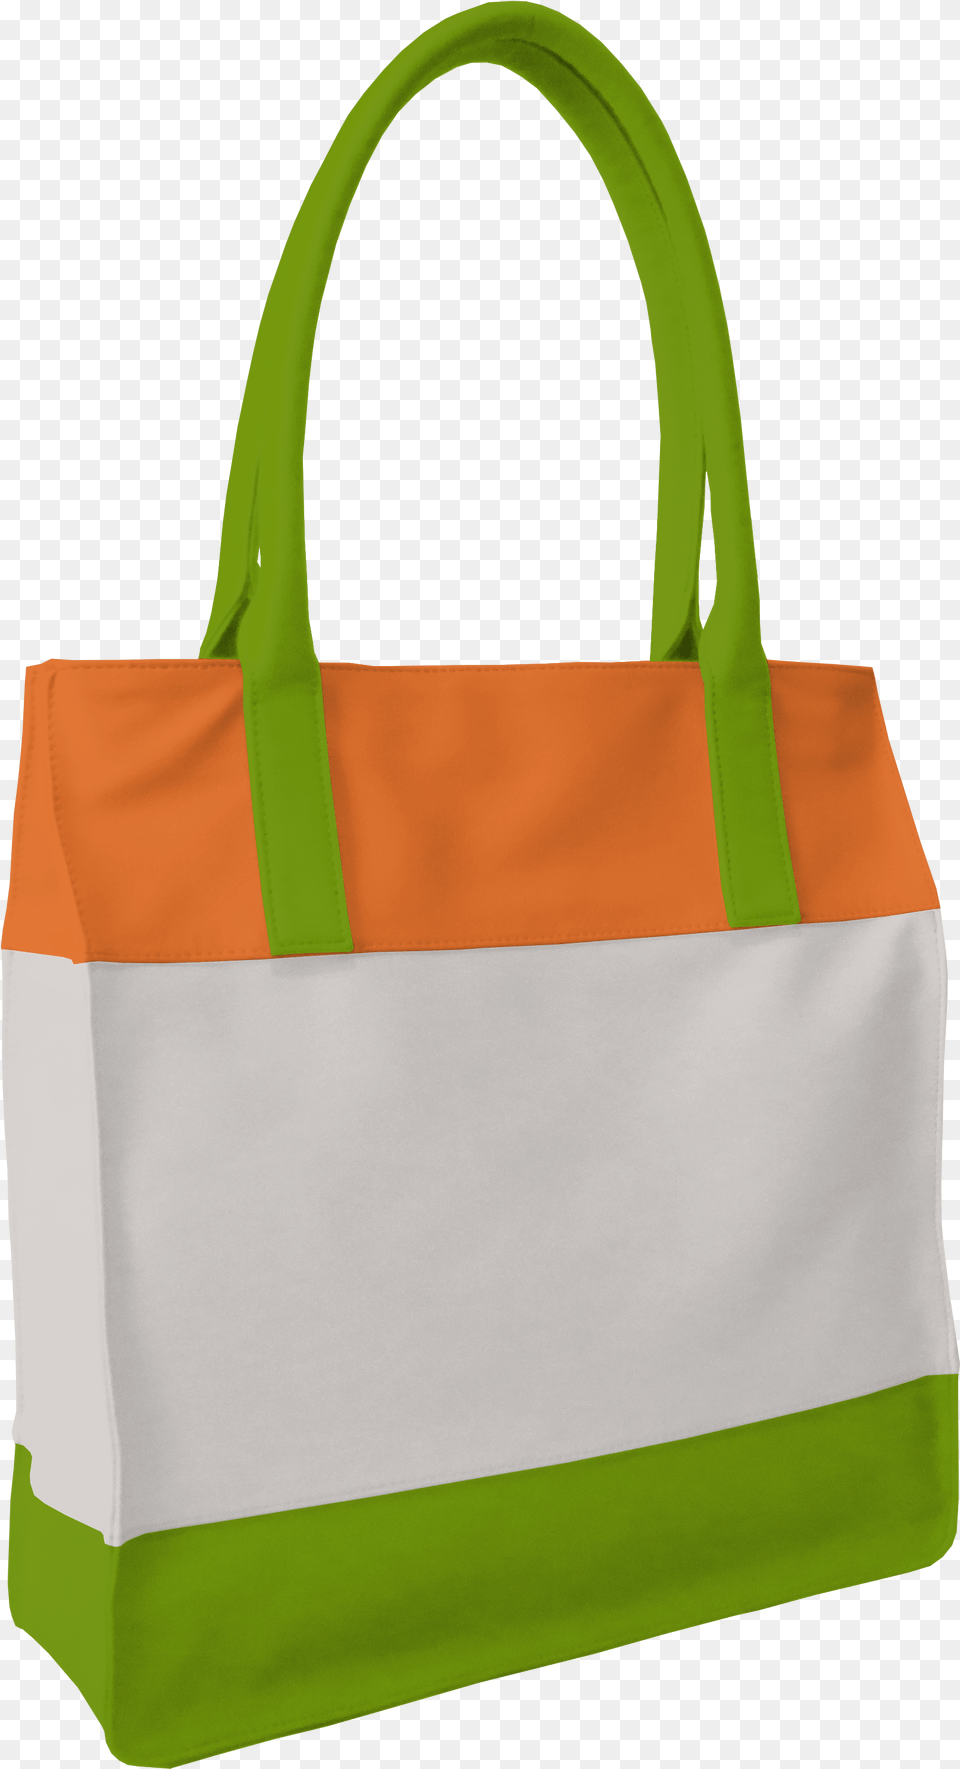 Design Your Own Tricolour Bag For Republic Day Shopping Cloth Bag, Accessories, Handbag, Tote Bag, Shopping Bag Png Image